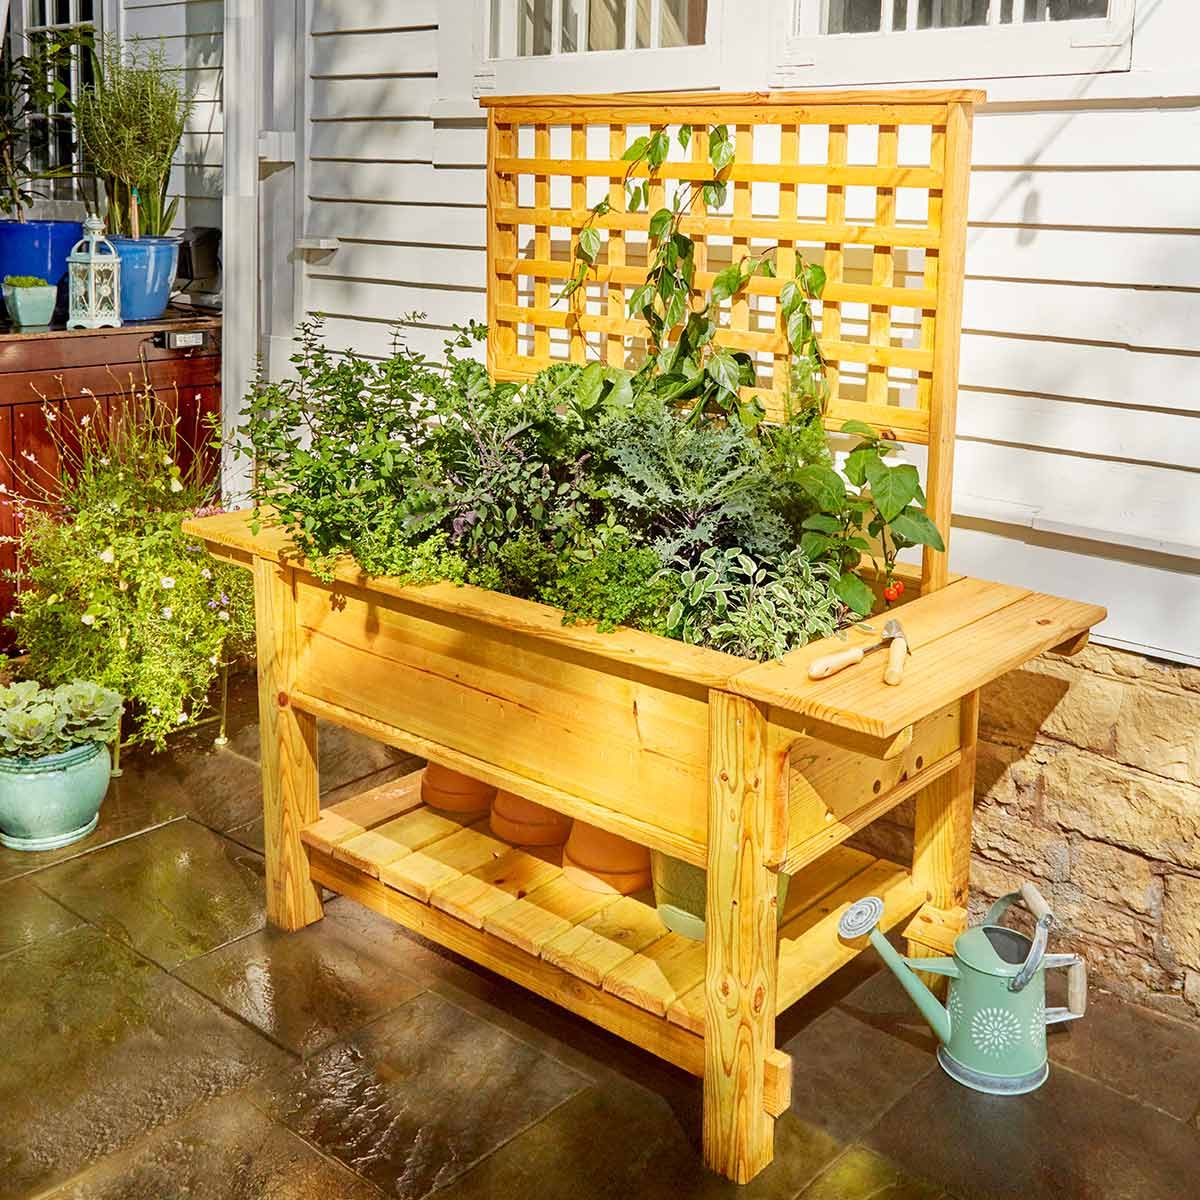 Woodworking projects garden